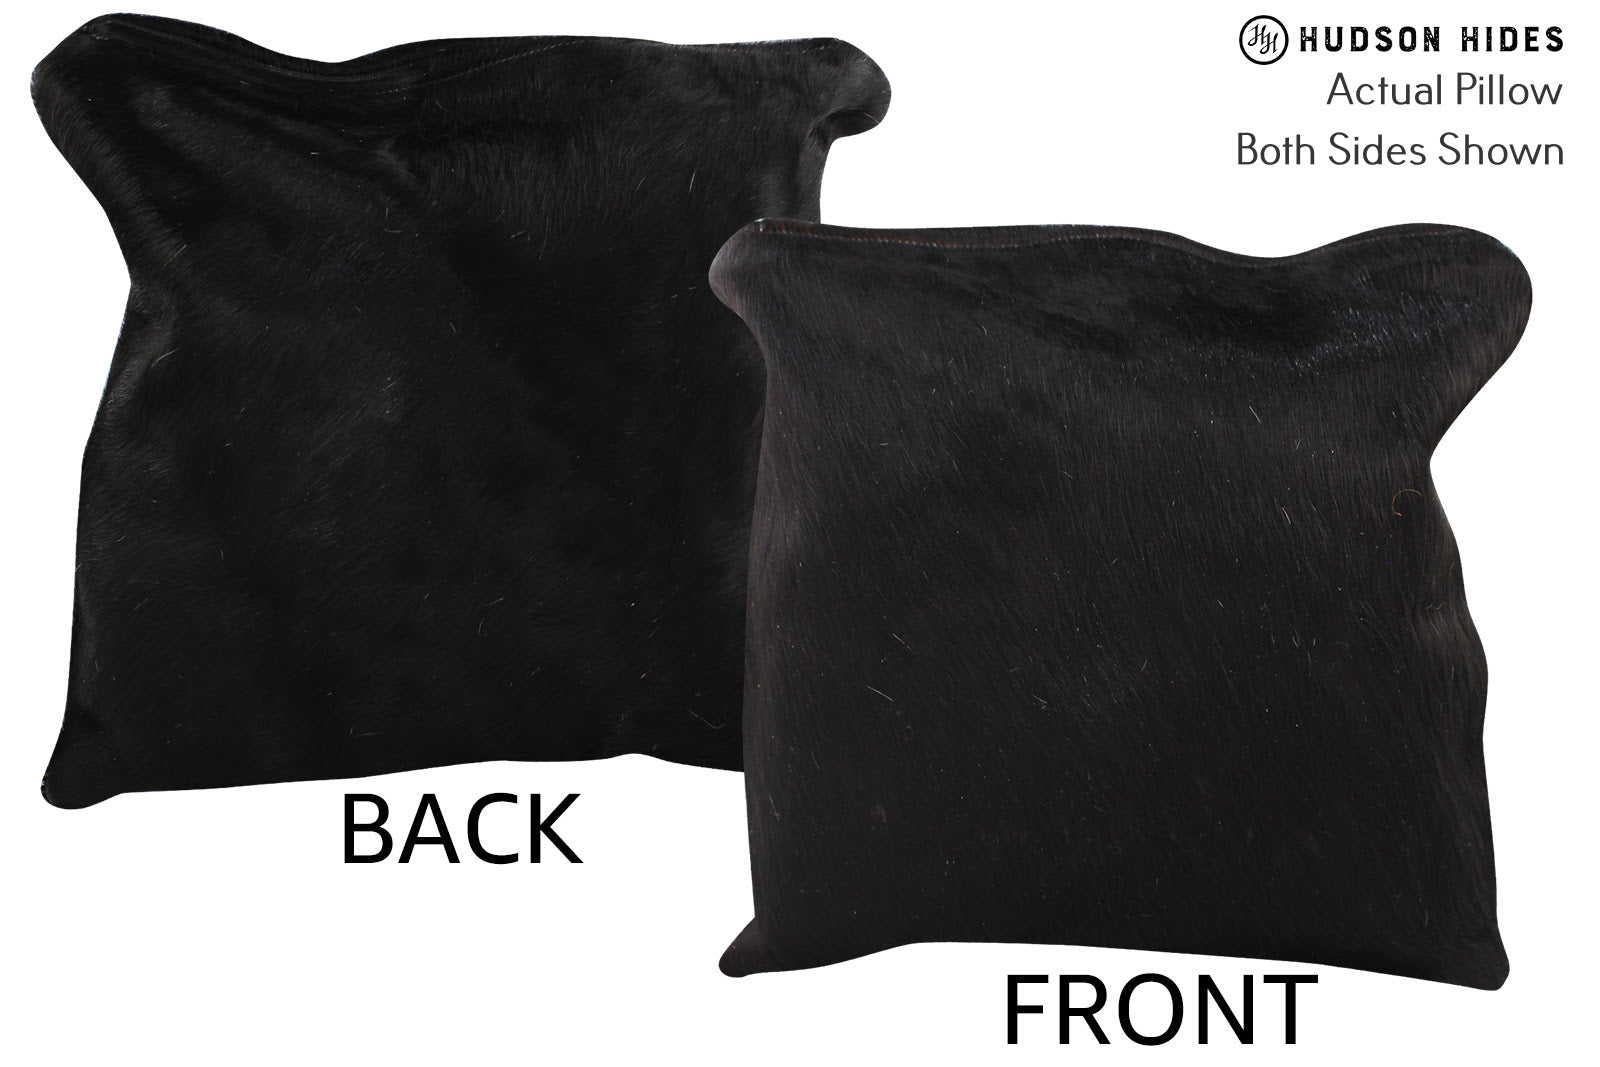 Solid Black Cowhide Pillow #74559